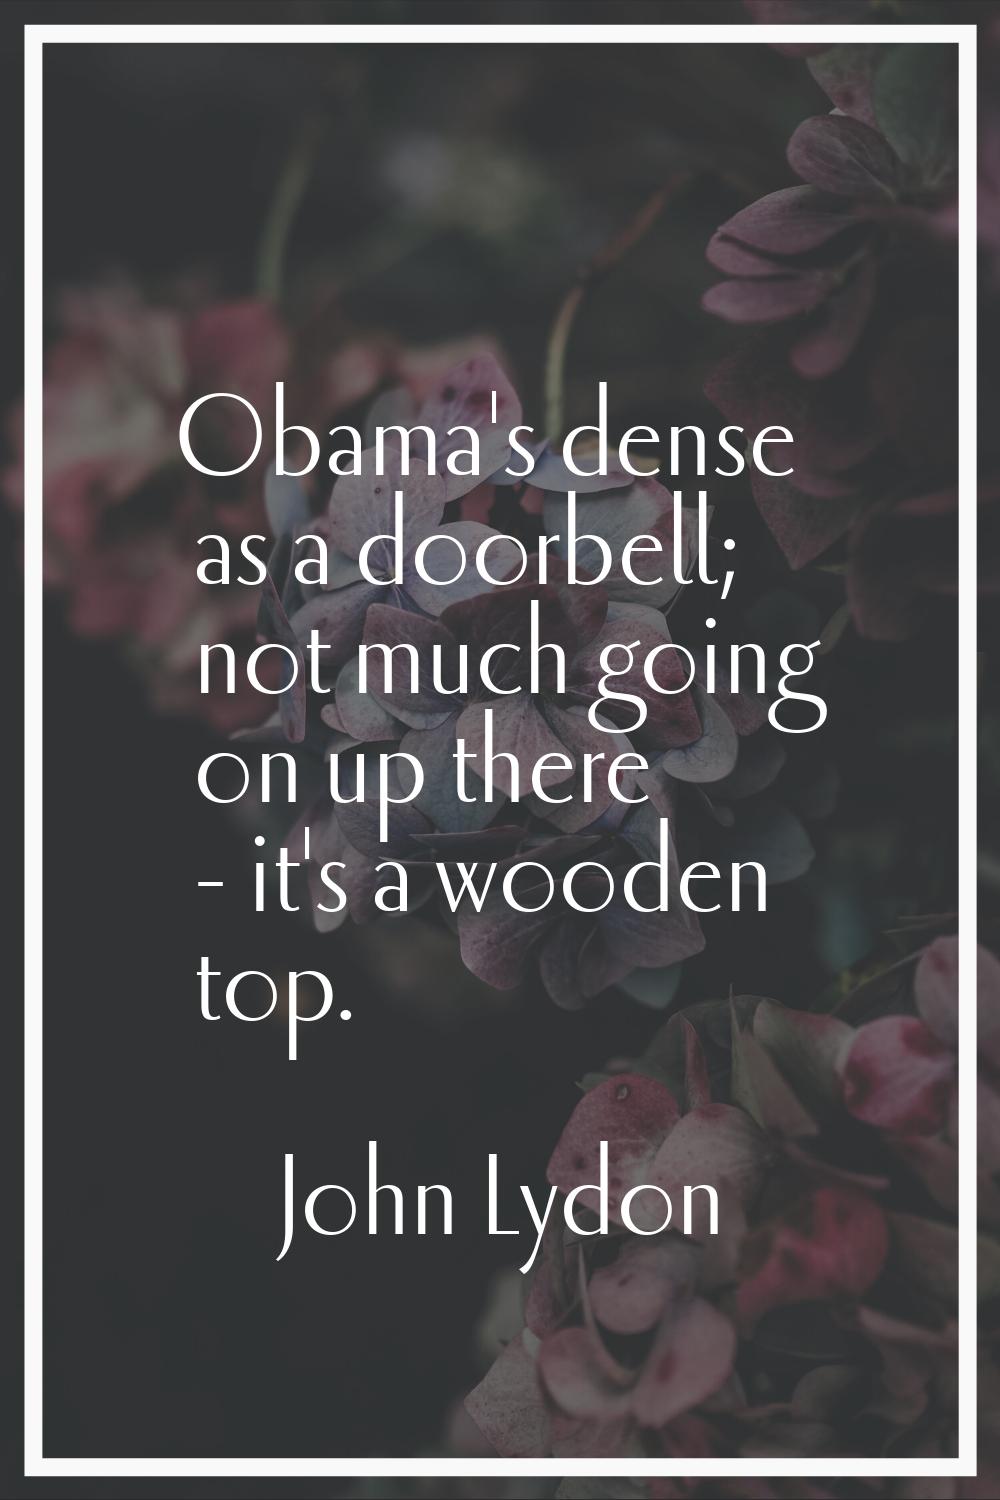 Obama's dense as a doorbell; not much going on up there - it's a wooden top.